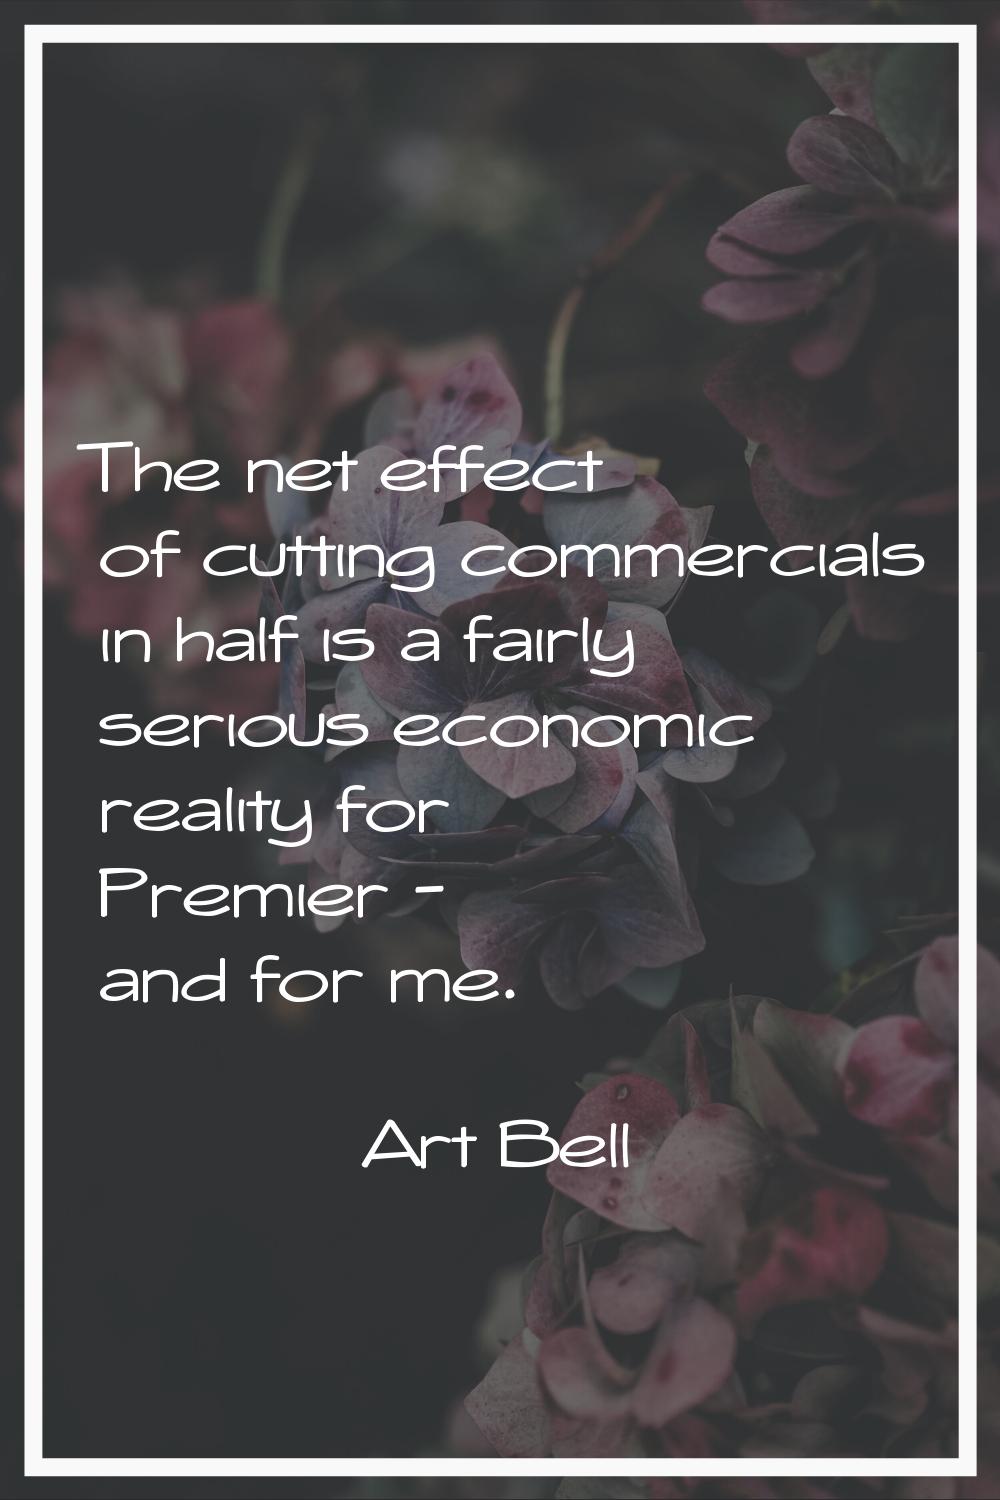 The net effect of cutting commercials in half is a fairly serious economic reality for Premier - an